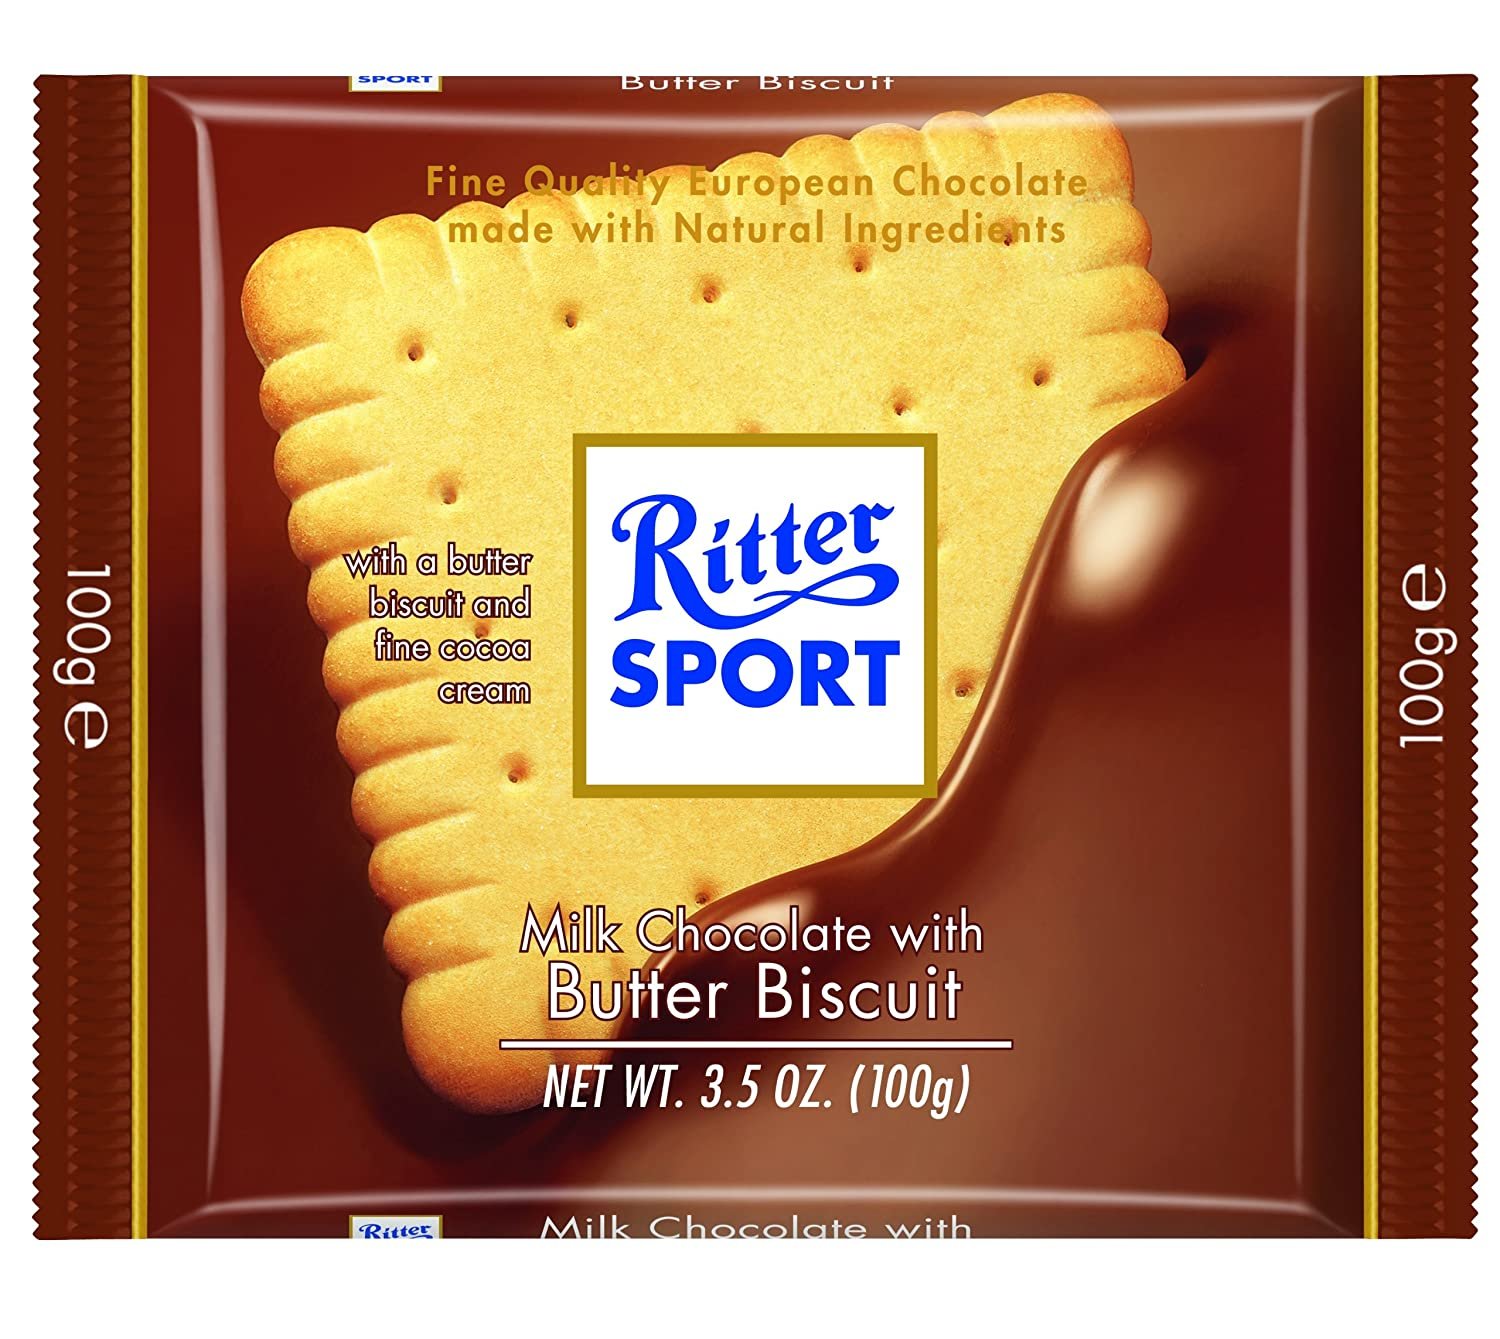 Ritter Sport Mill Chocolate Butter Biscuit